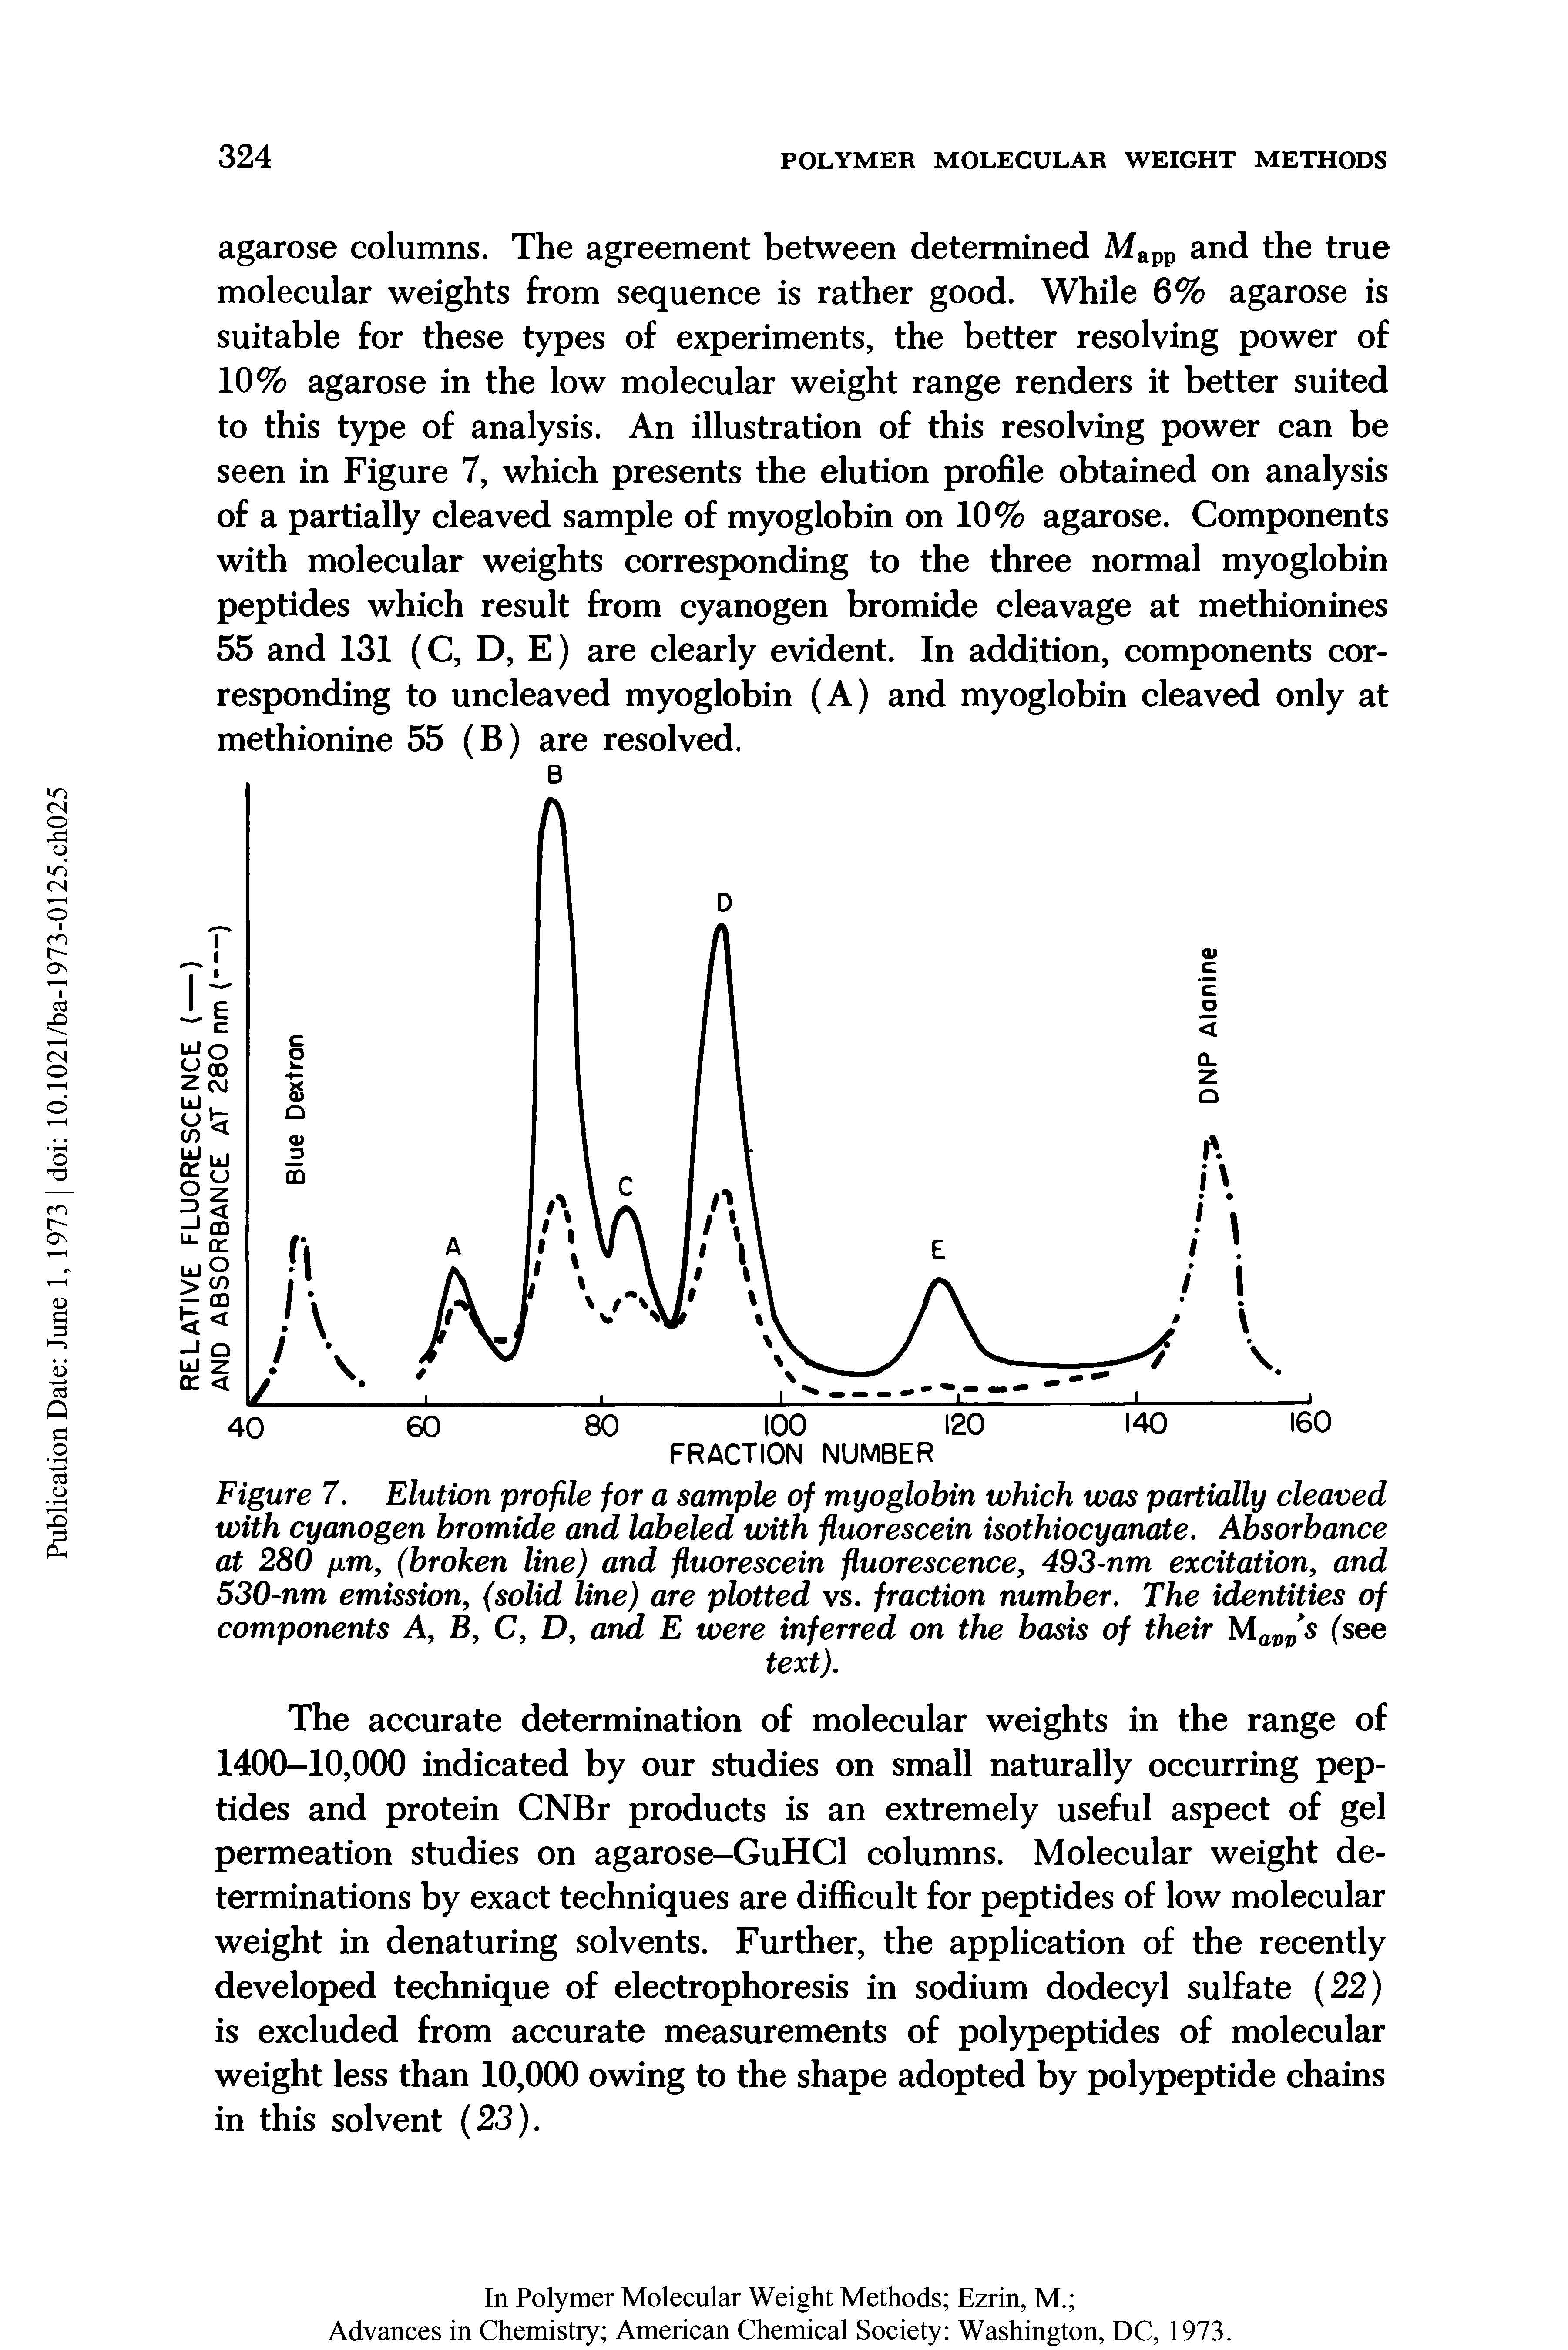 Figure 7. Elution profile for a sample of myoglobin which was partially cleaved with cyanogen bromide and labeled with fluorescein isothiocyanate. Absorbance at 280 fim, (broken line) and fluorescein fluorescence, 493-nm excitation, and 530-nm emission, (solid line) are plotted vs. fraction number. The identities of components A, B, C, D, and E were inferred on the basis of their Mav s (see...